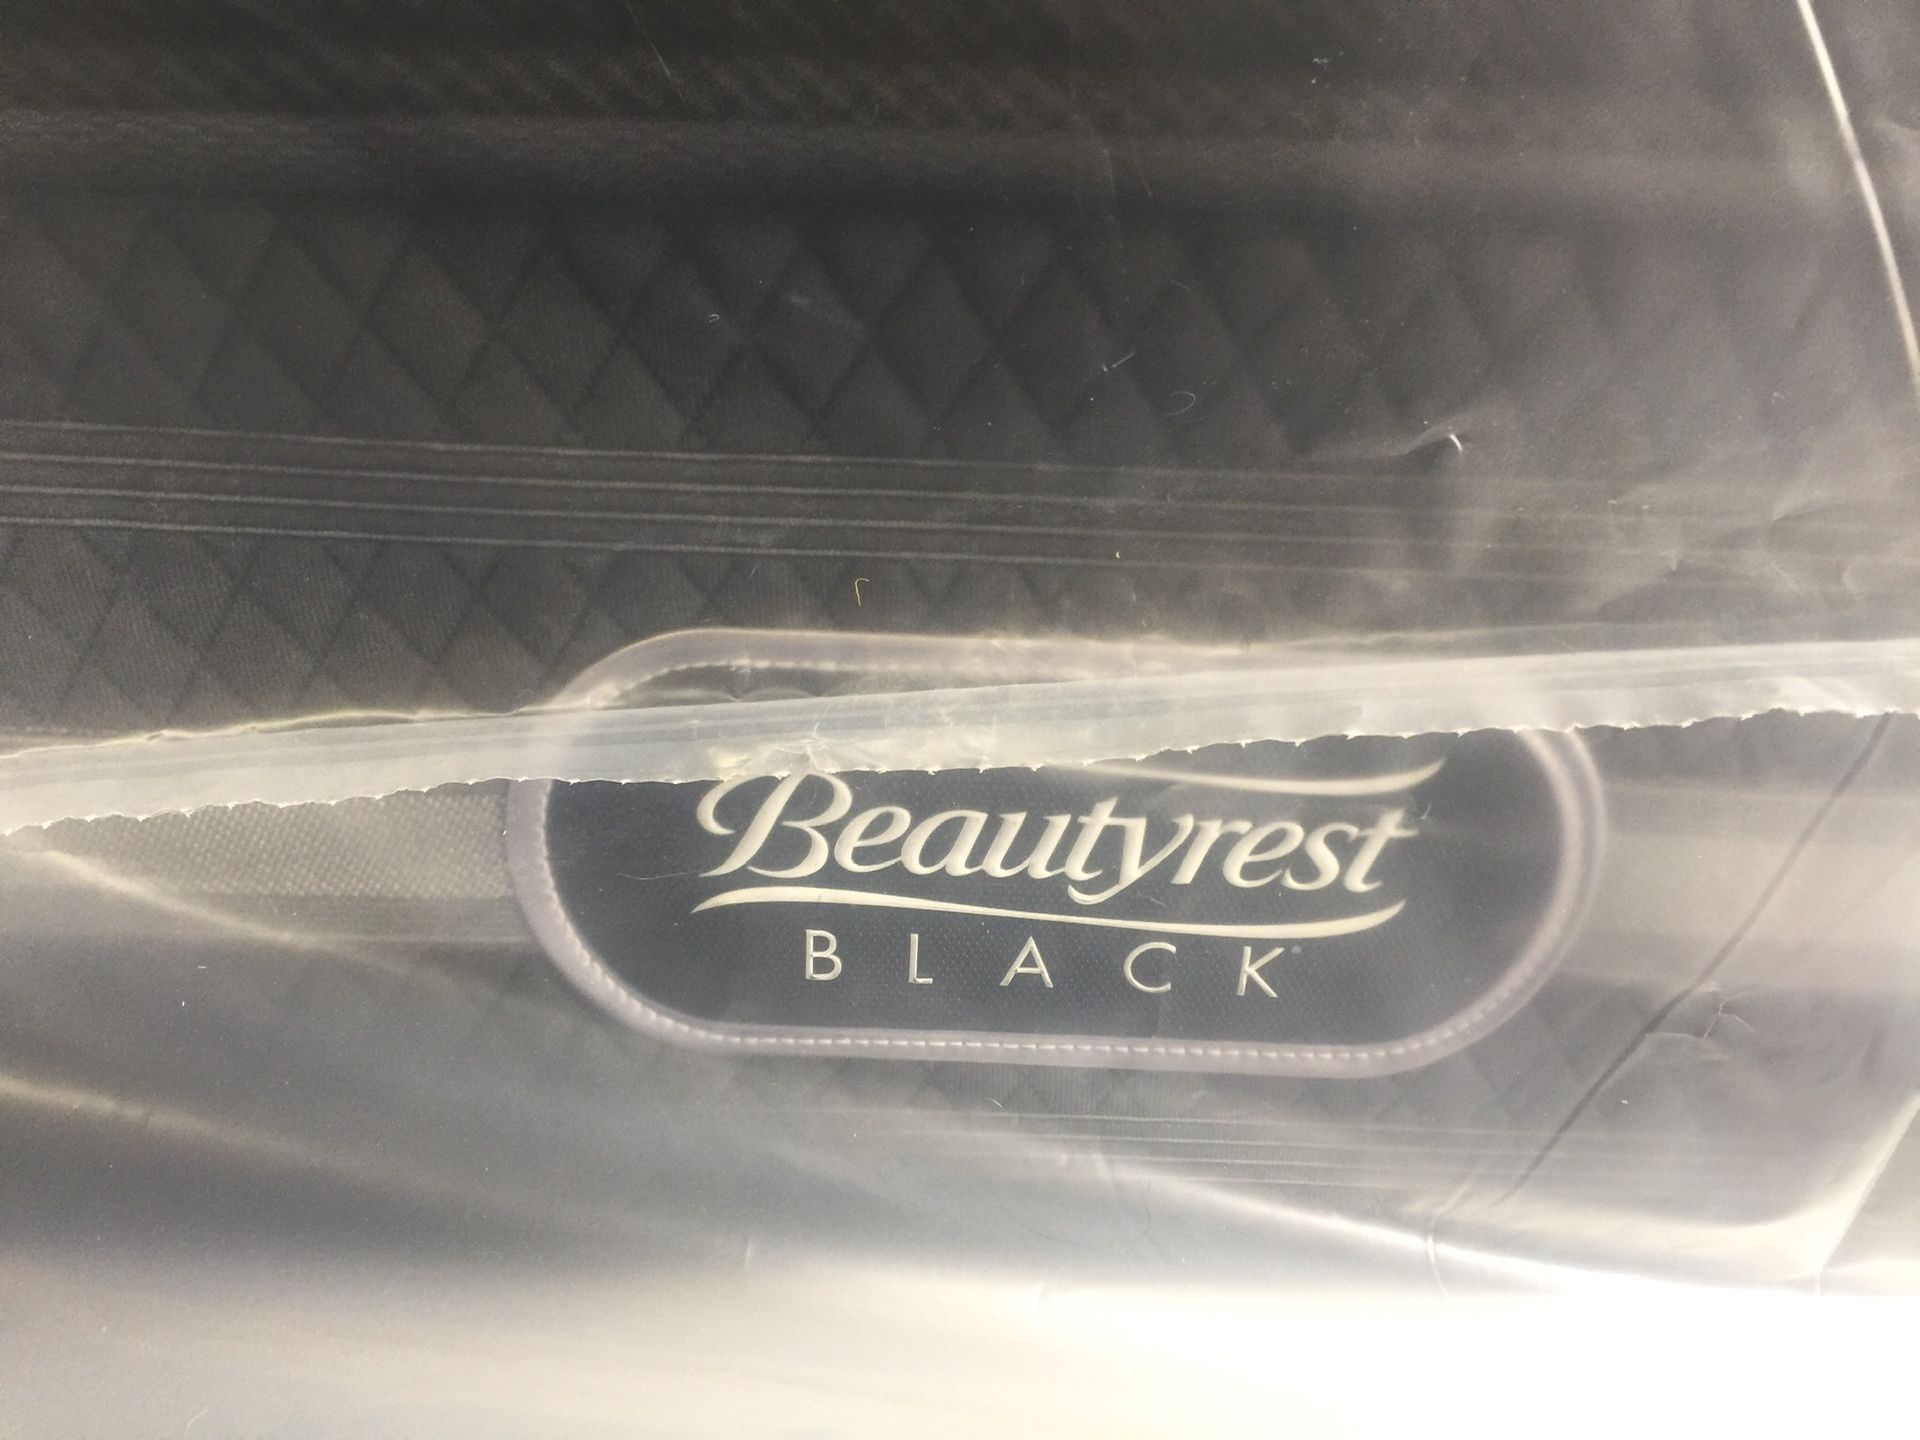 King size beautyrest black (must see)